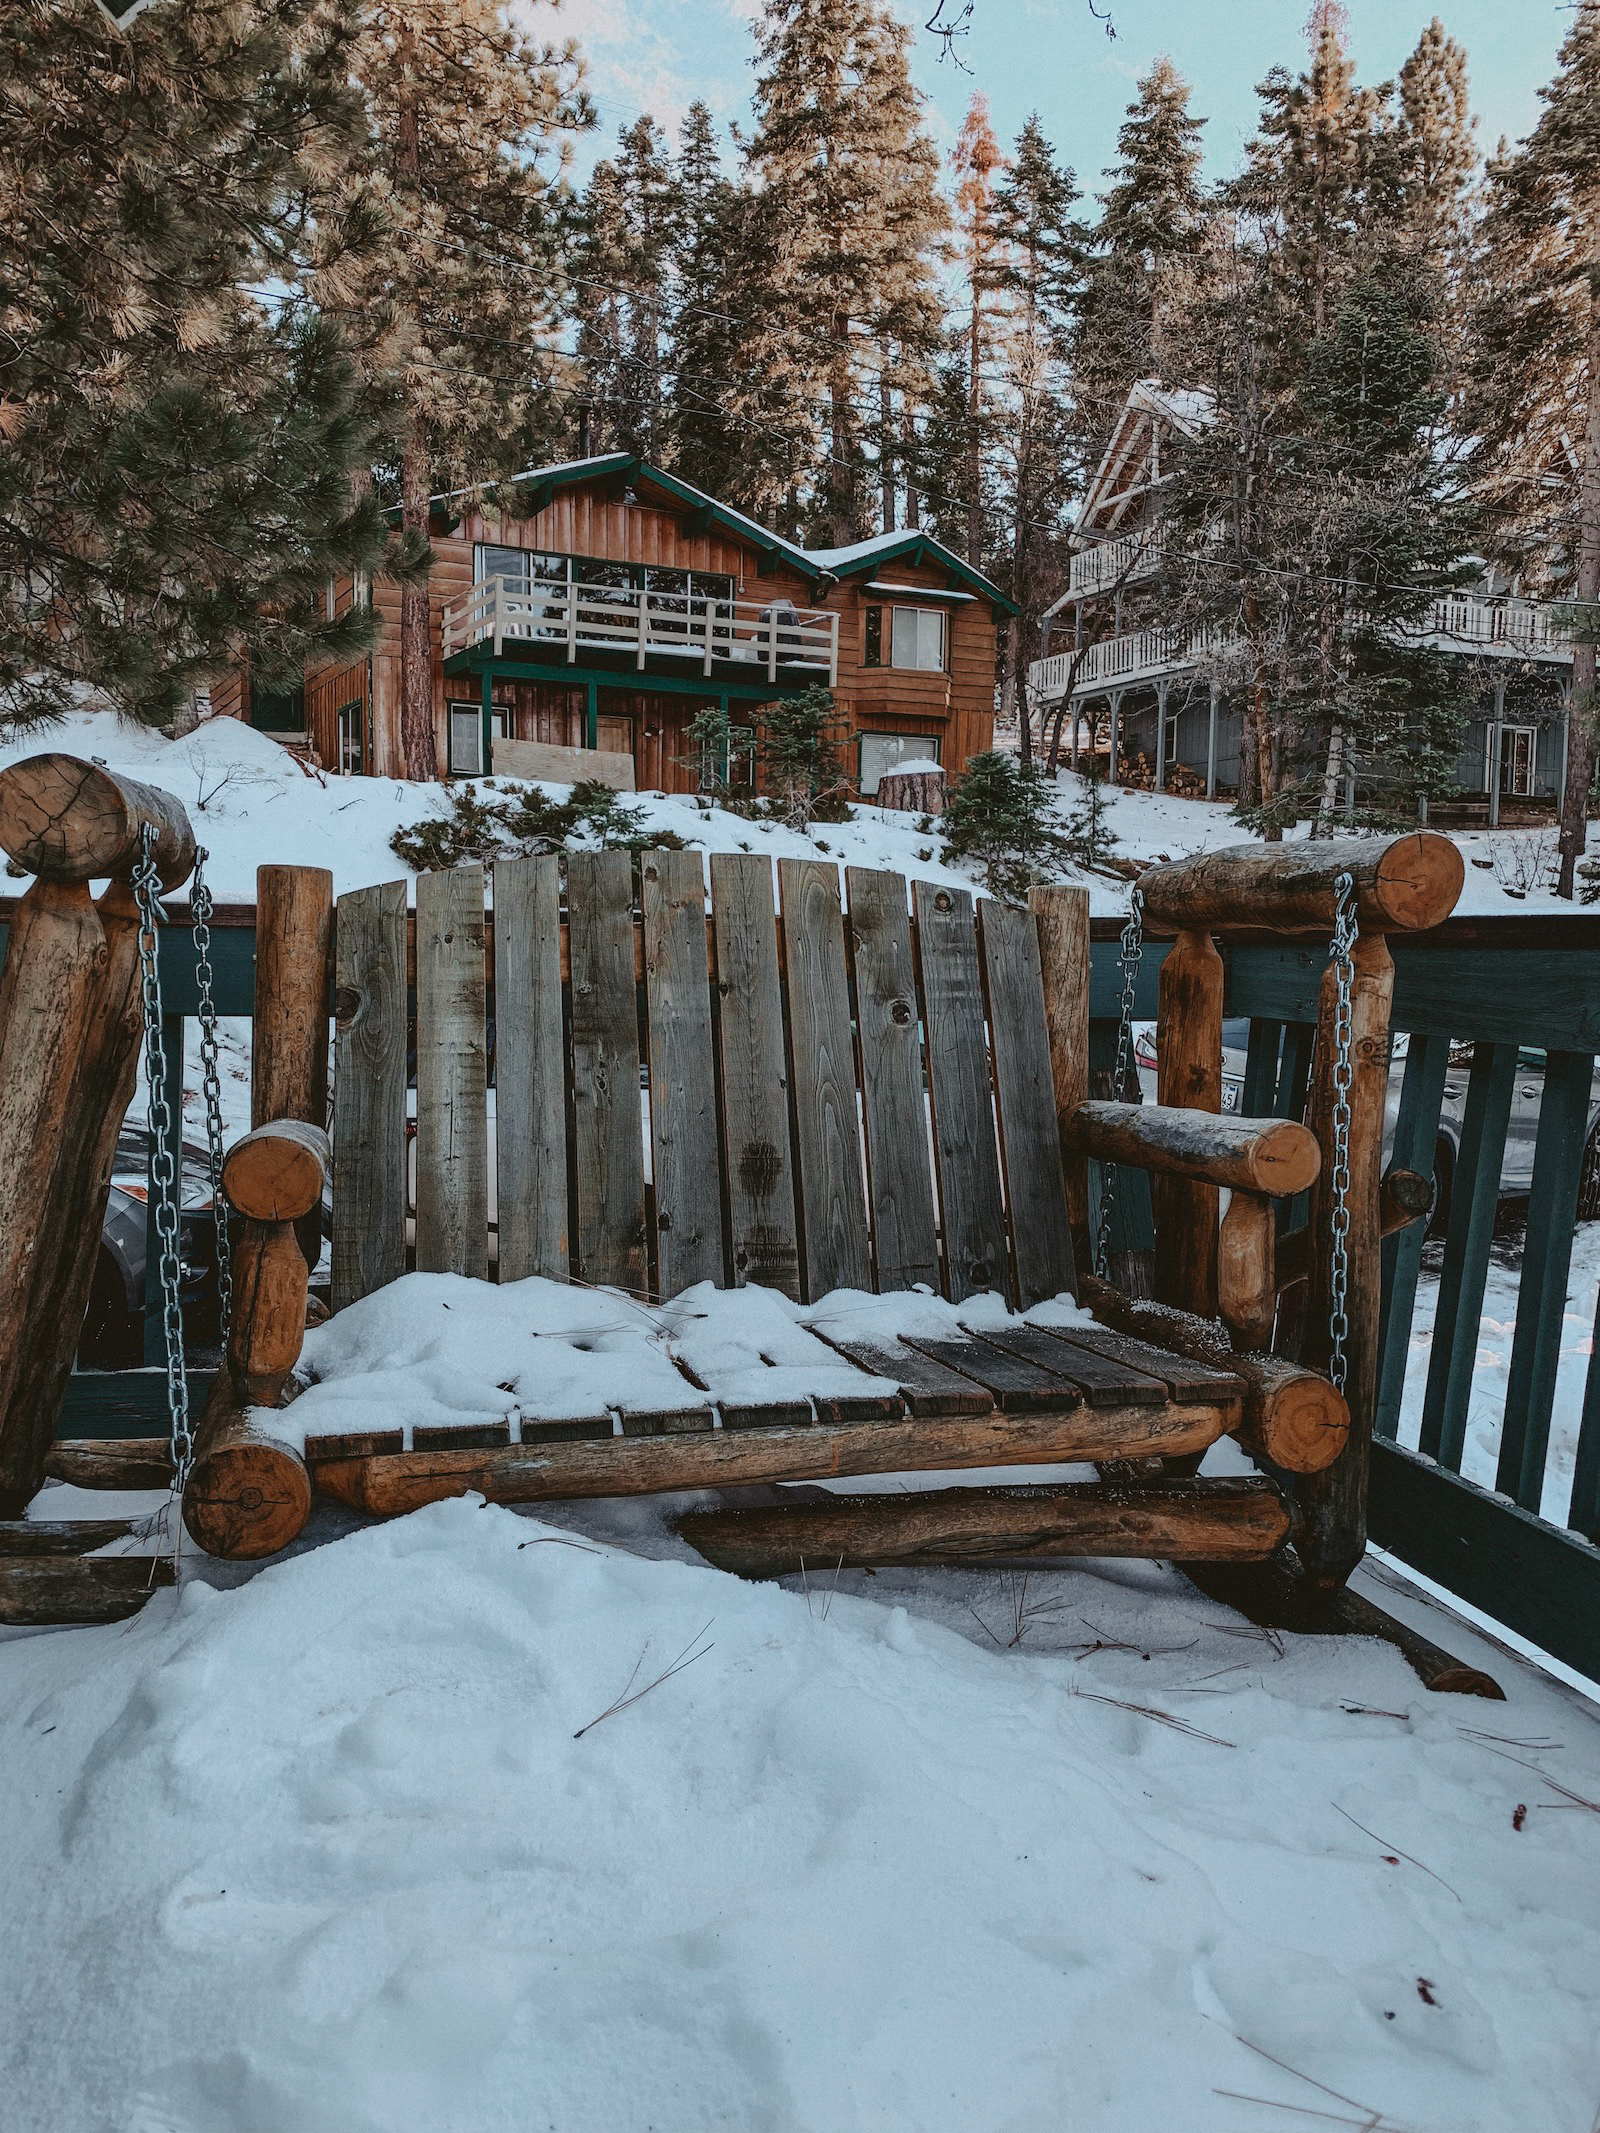 A Weekend in Big Bear for New Year's | Winter Wonderland | Travel Inspo | Mountains | Winter Trip | Blondie in the City by Hayley Larue